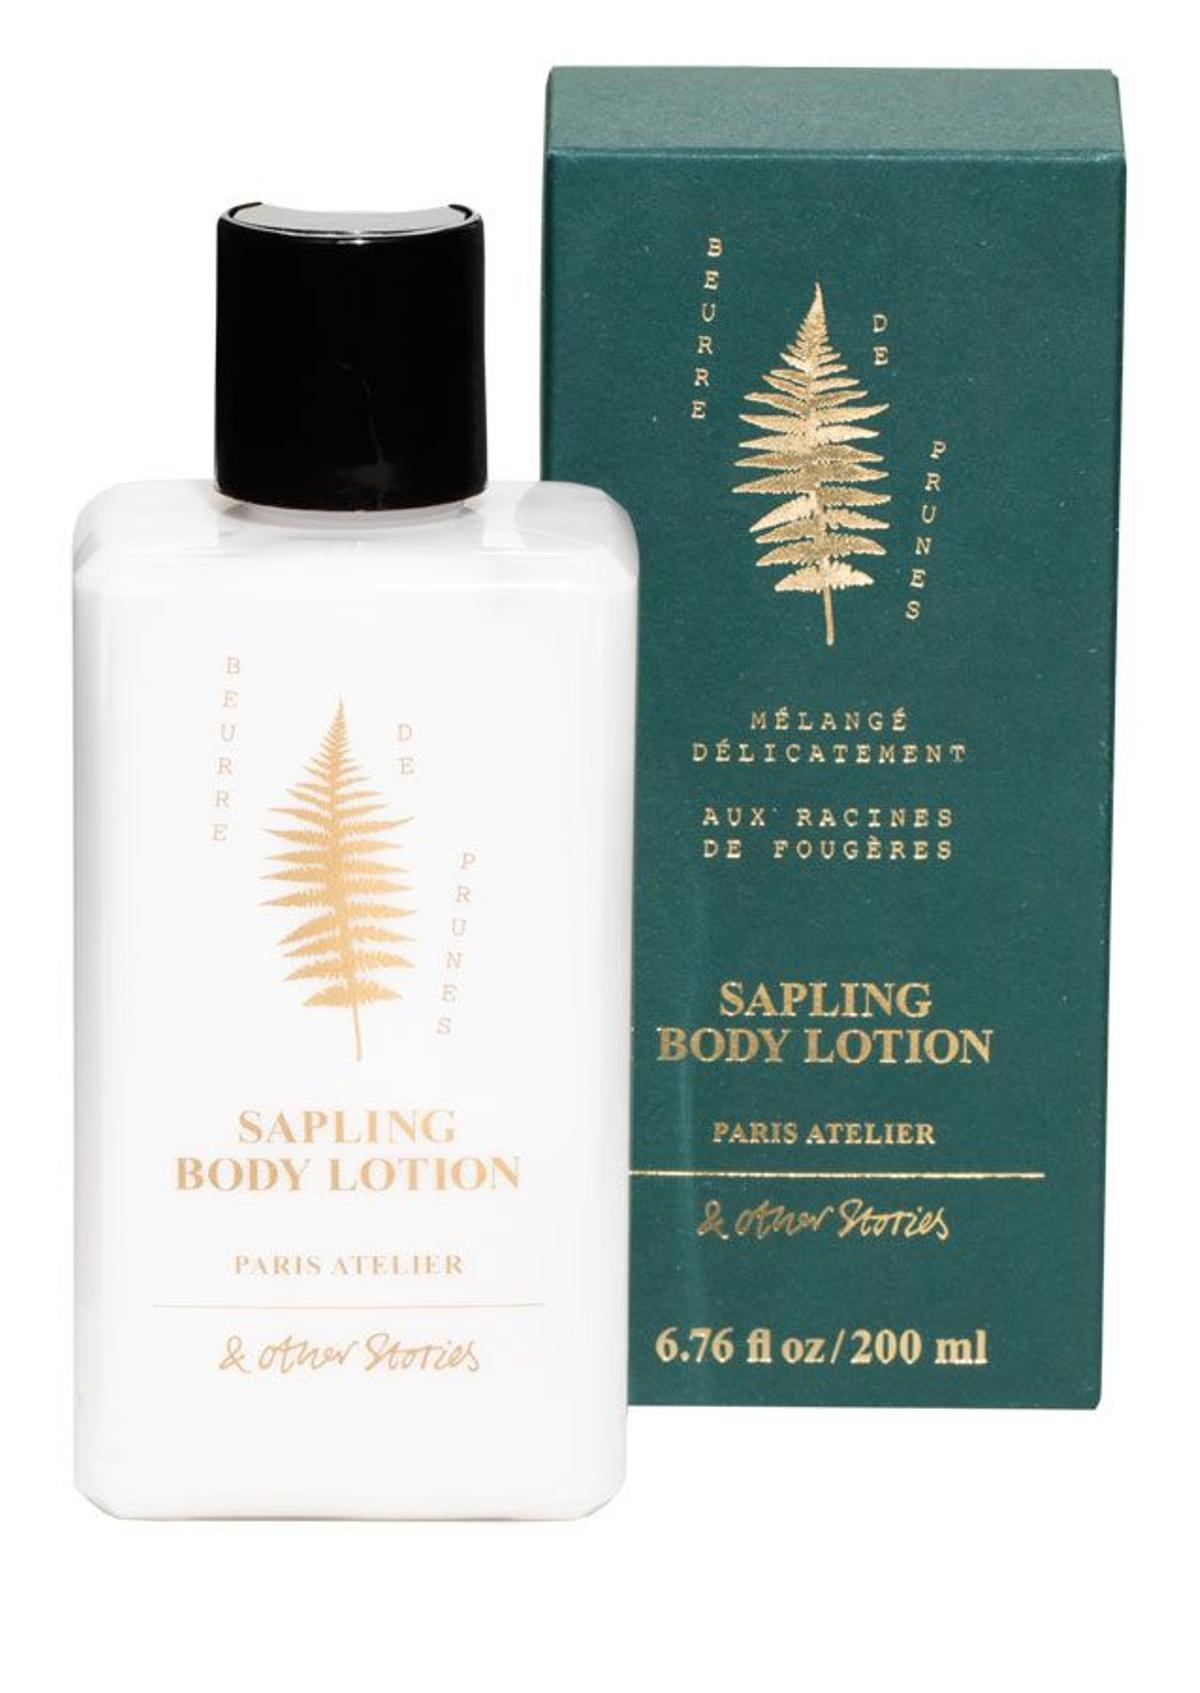 Regalos amigo invisible: Sapling Body Lotion, &amp; Other Stories